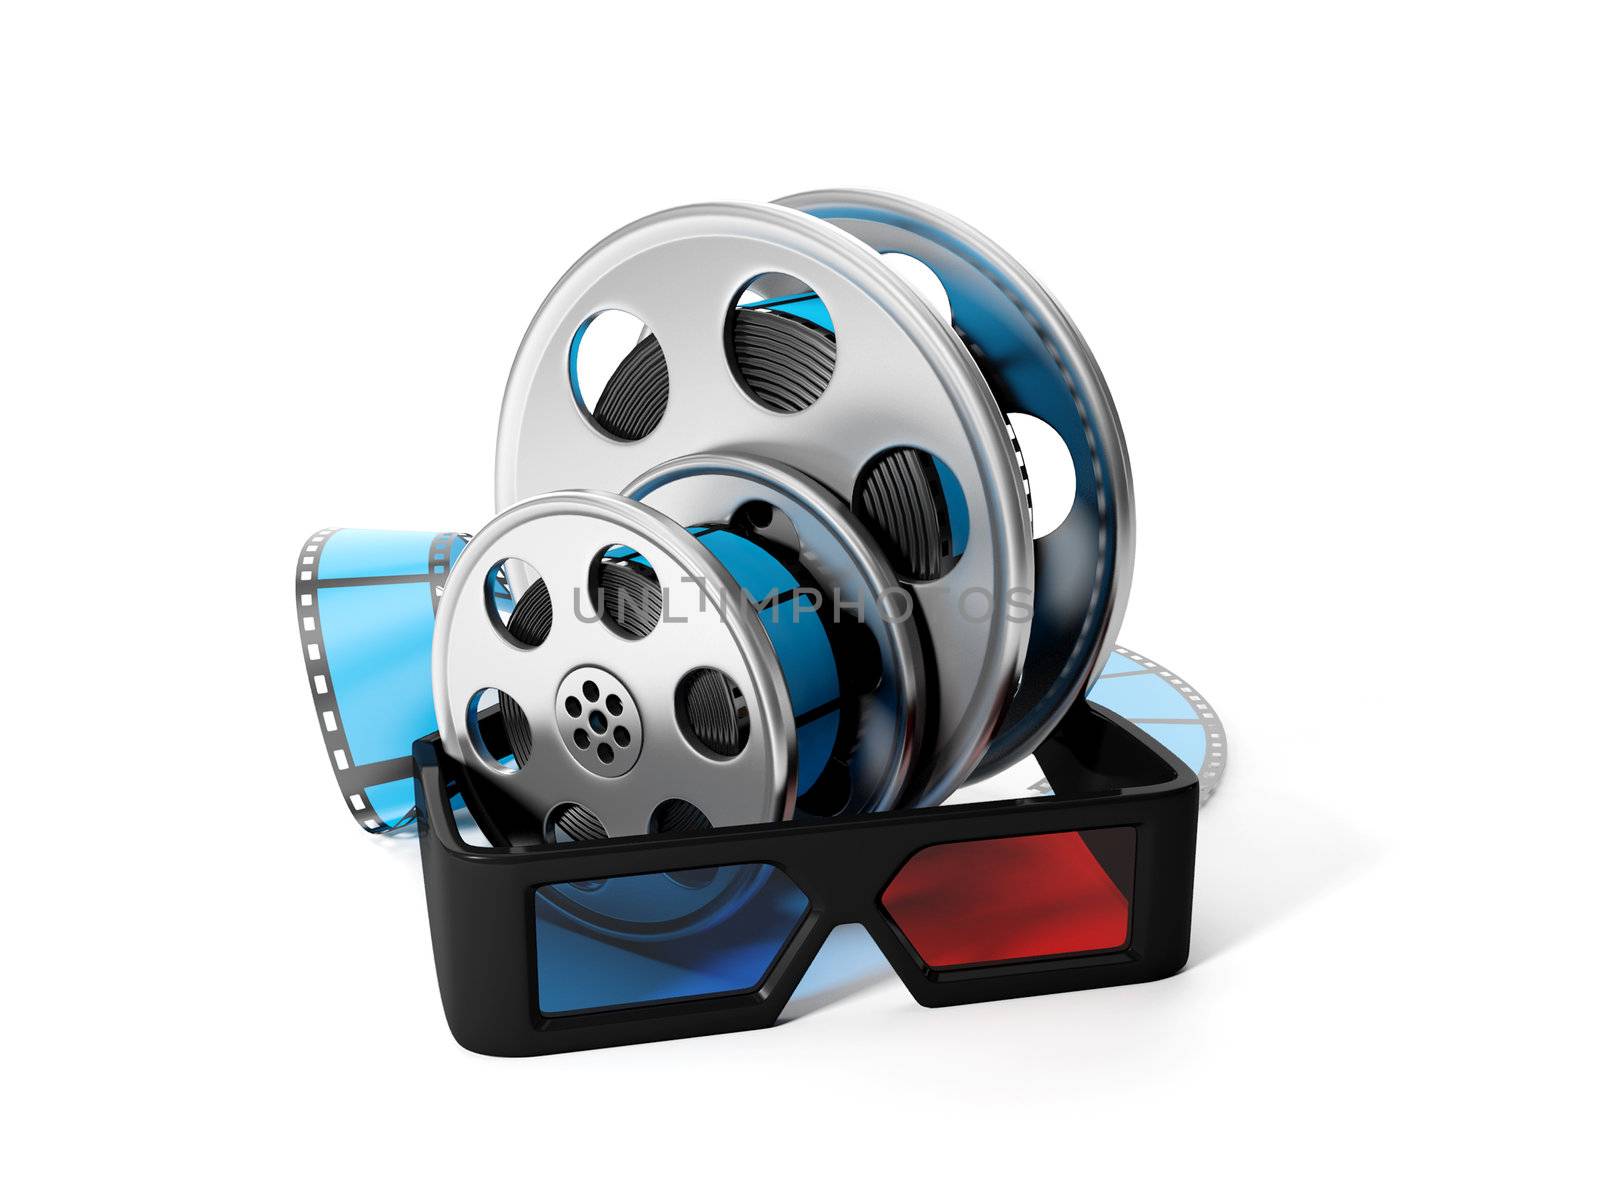 3d illustration: Reels of film and 3D glasses. Isolated image